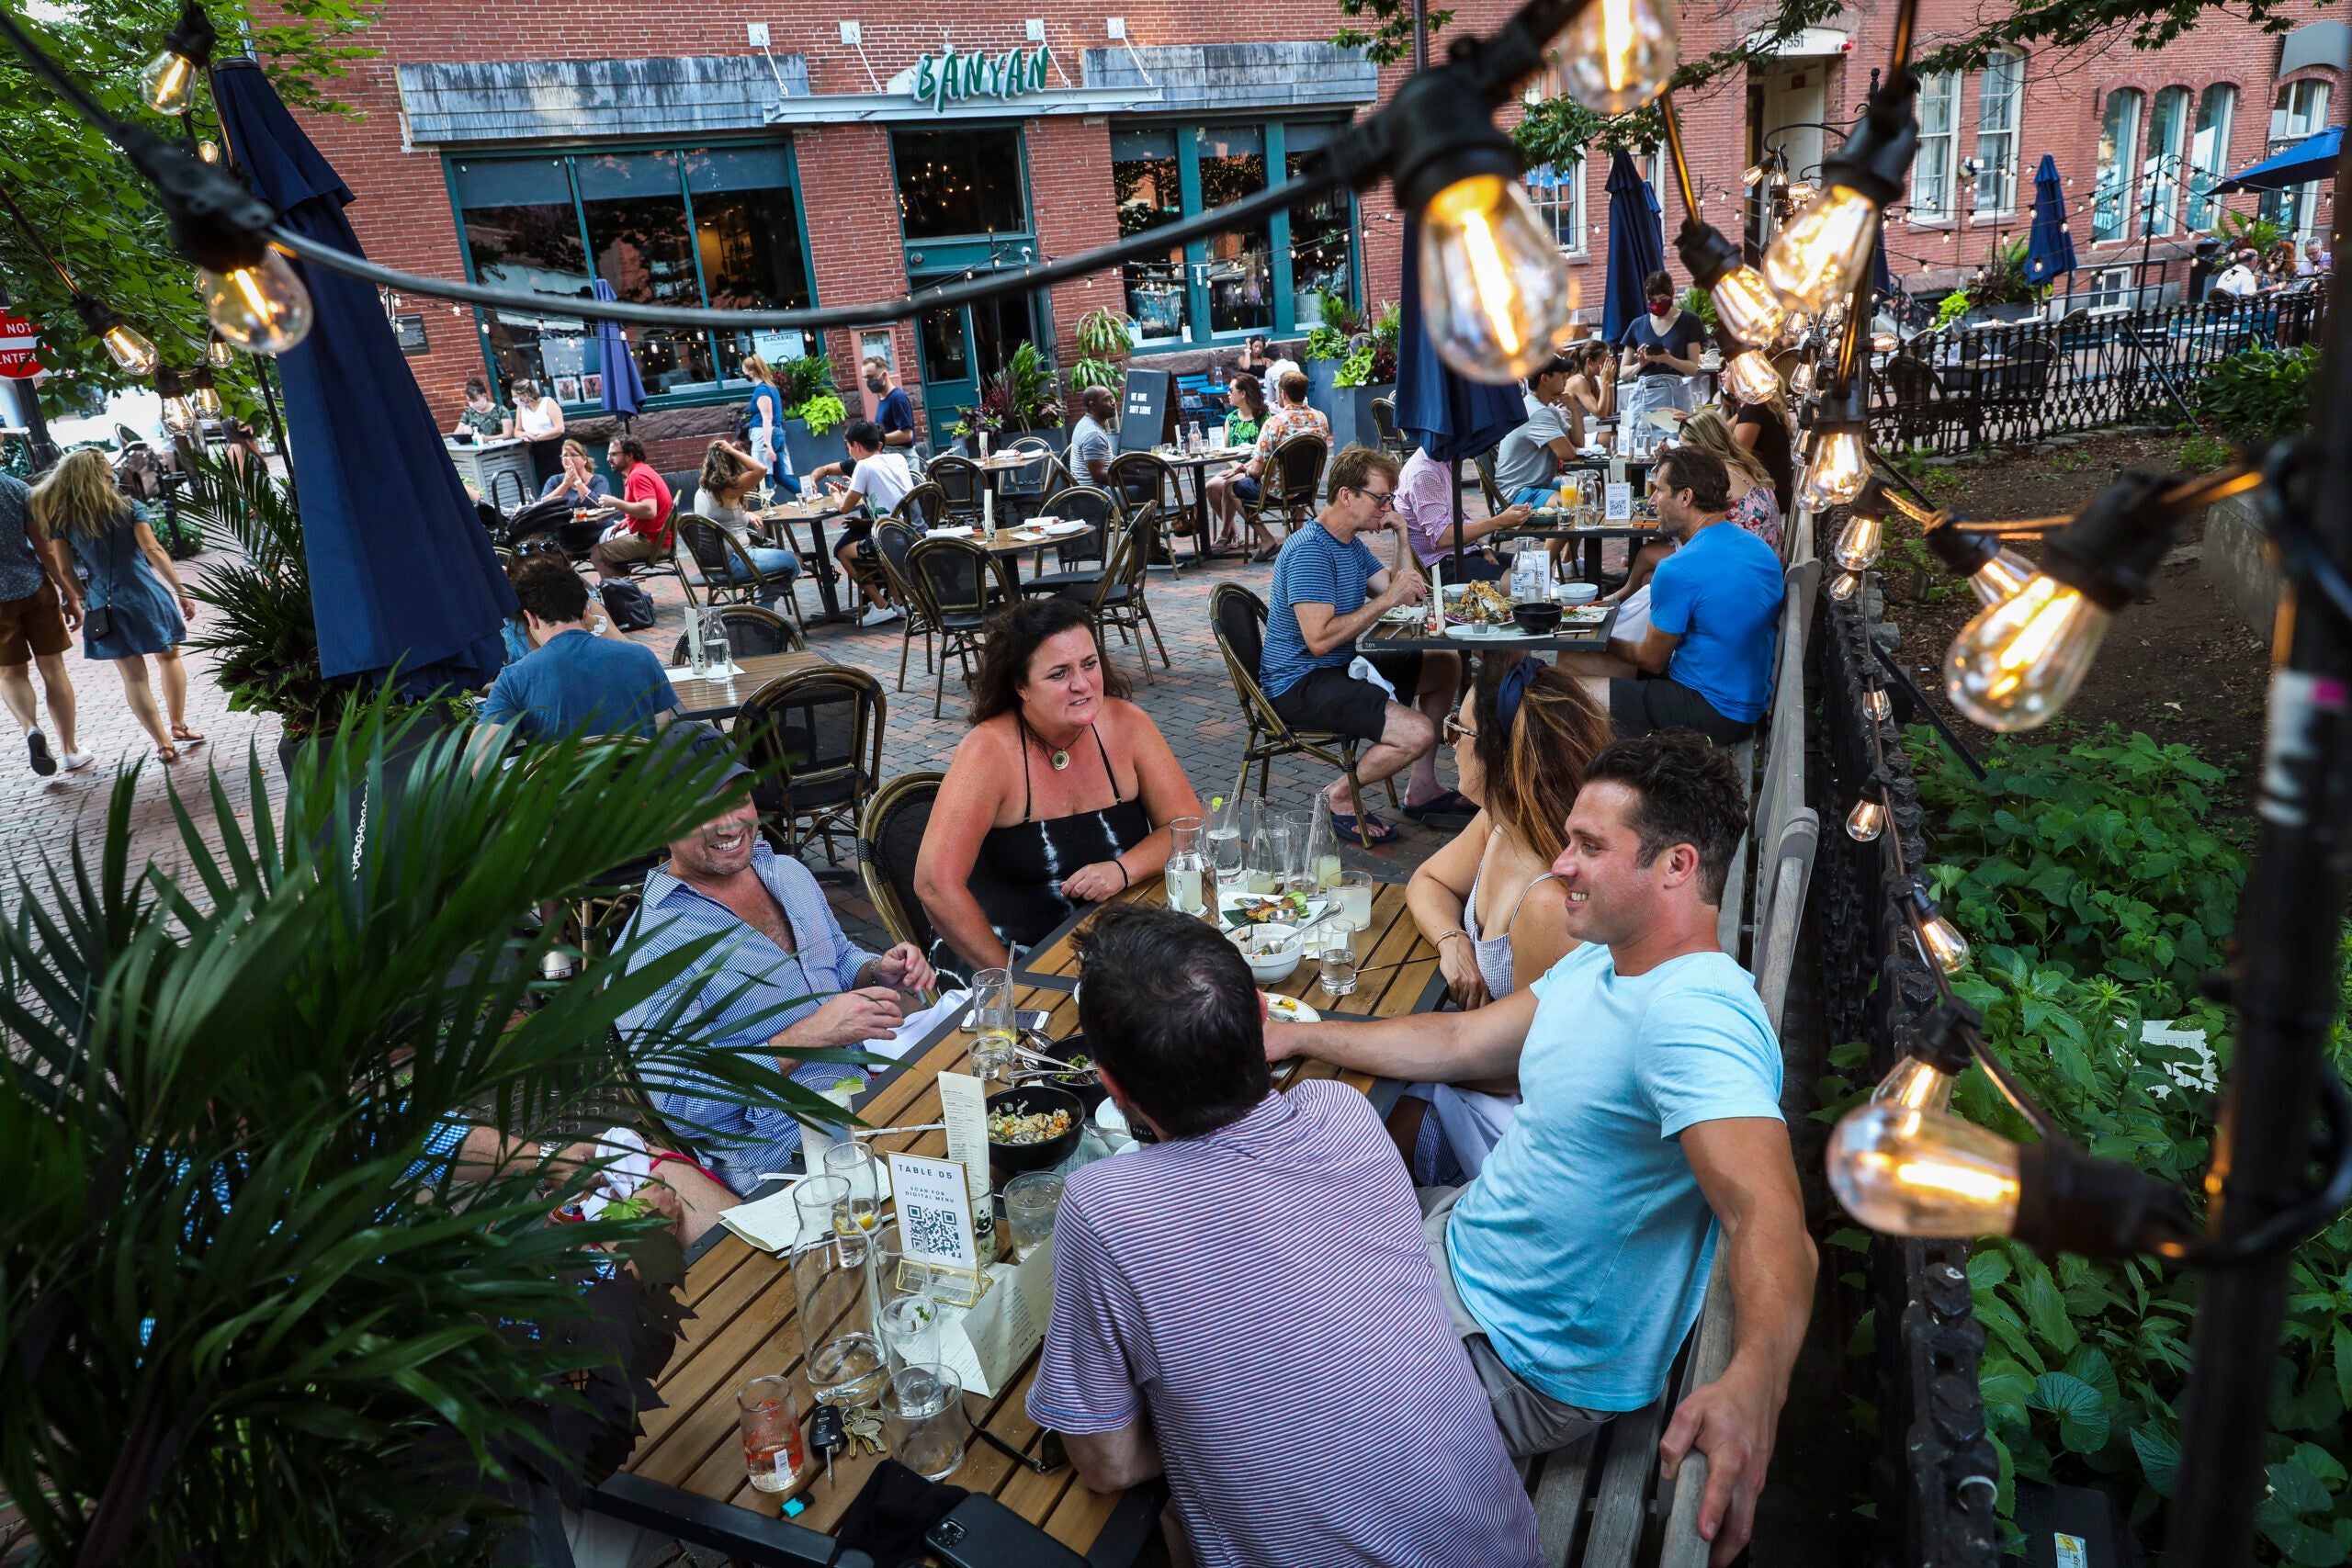 Where to Find Family-Friendly Brewery Patios and Beer Gardens Around Boston